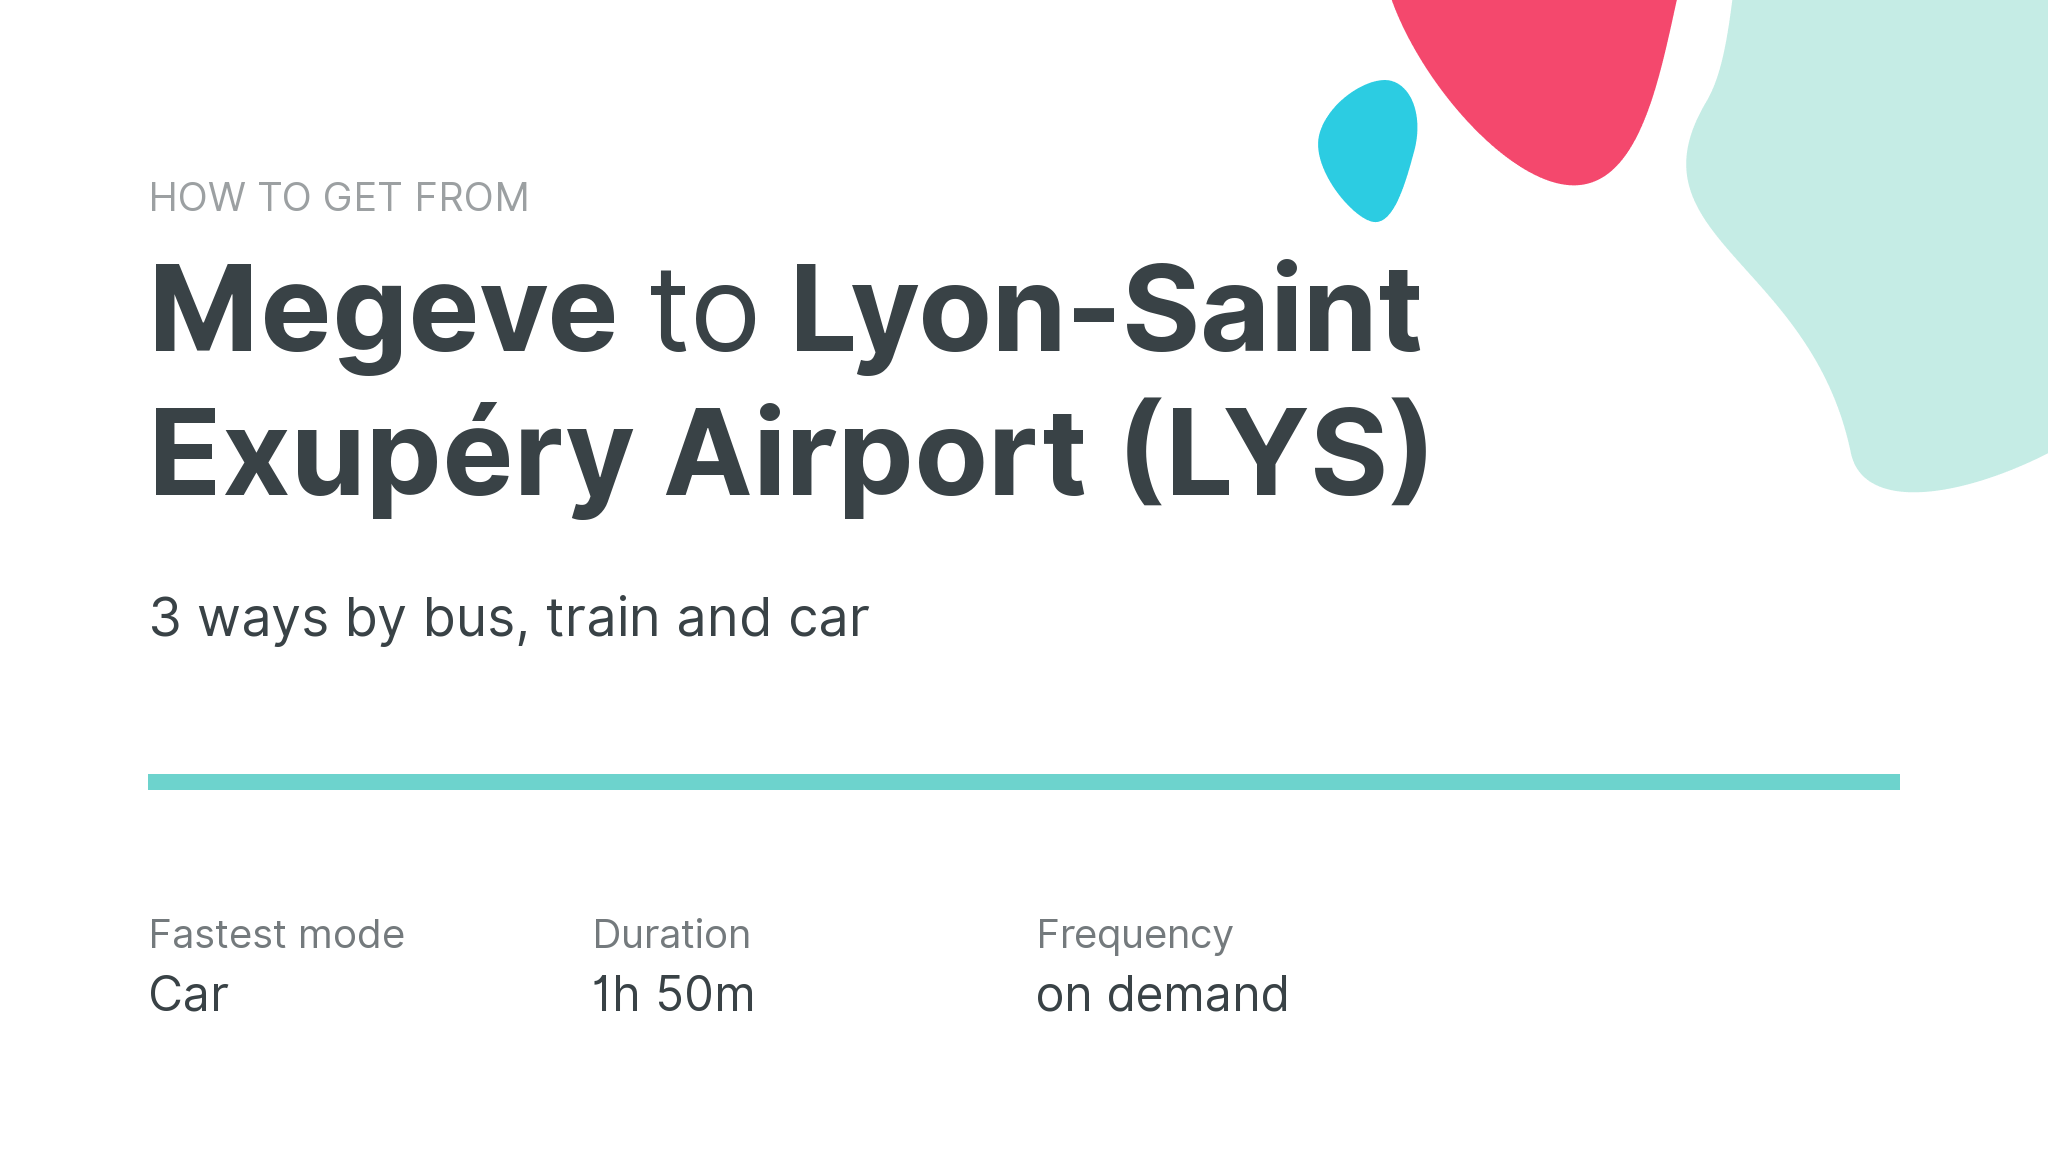 How do I get from Megeve to Lyon-Saint Exupéry Airport (LYS)